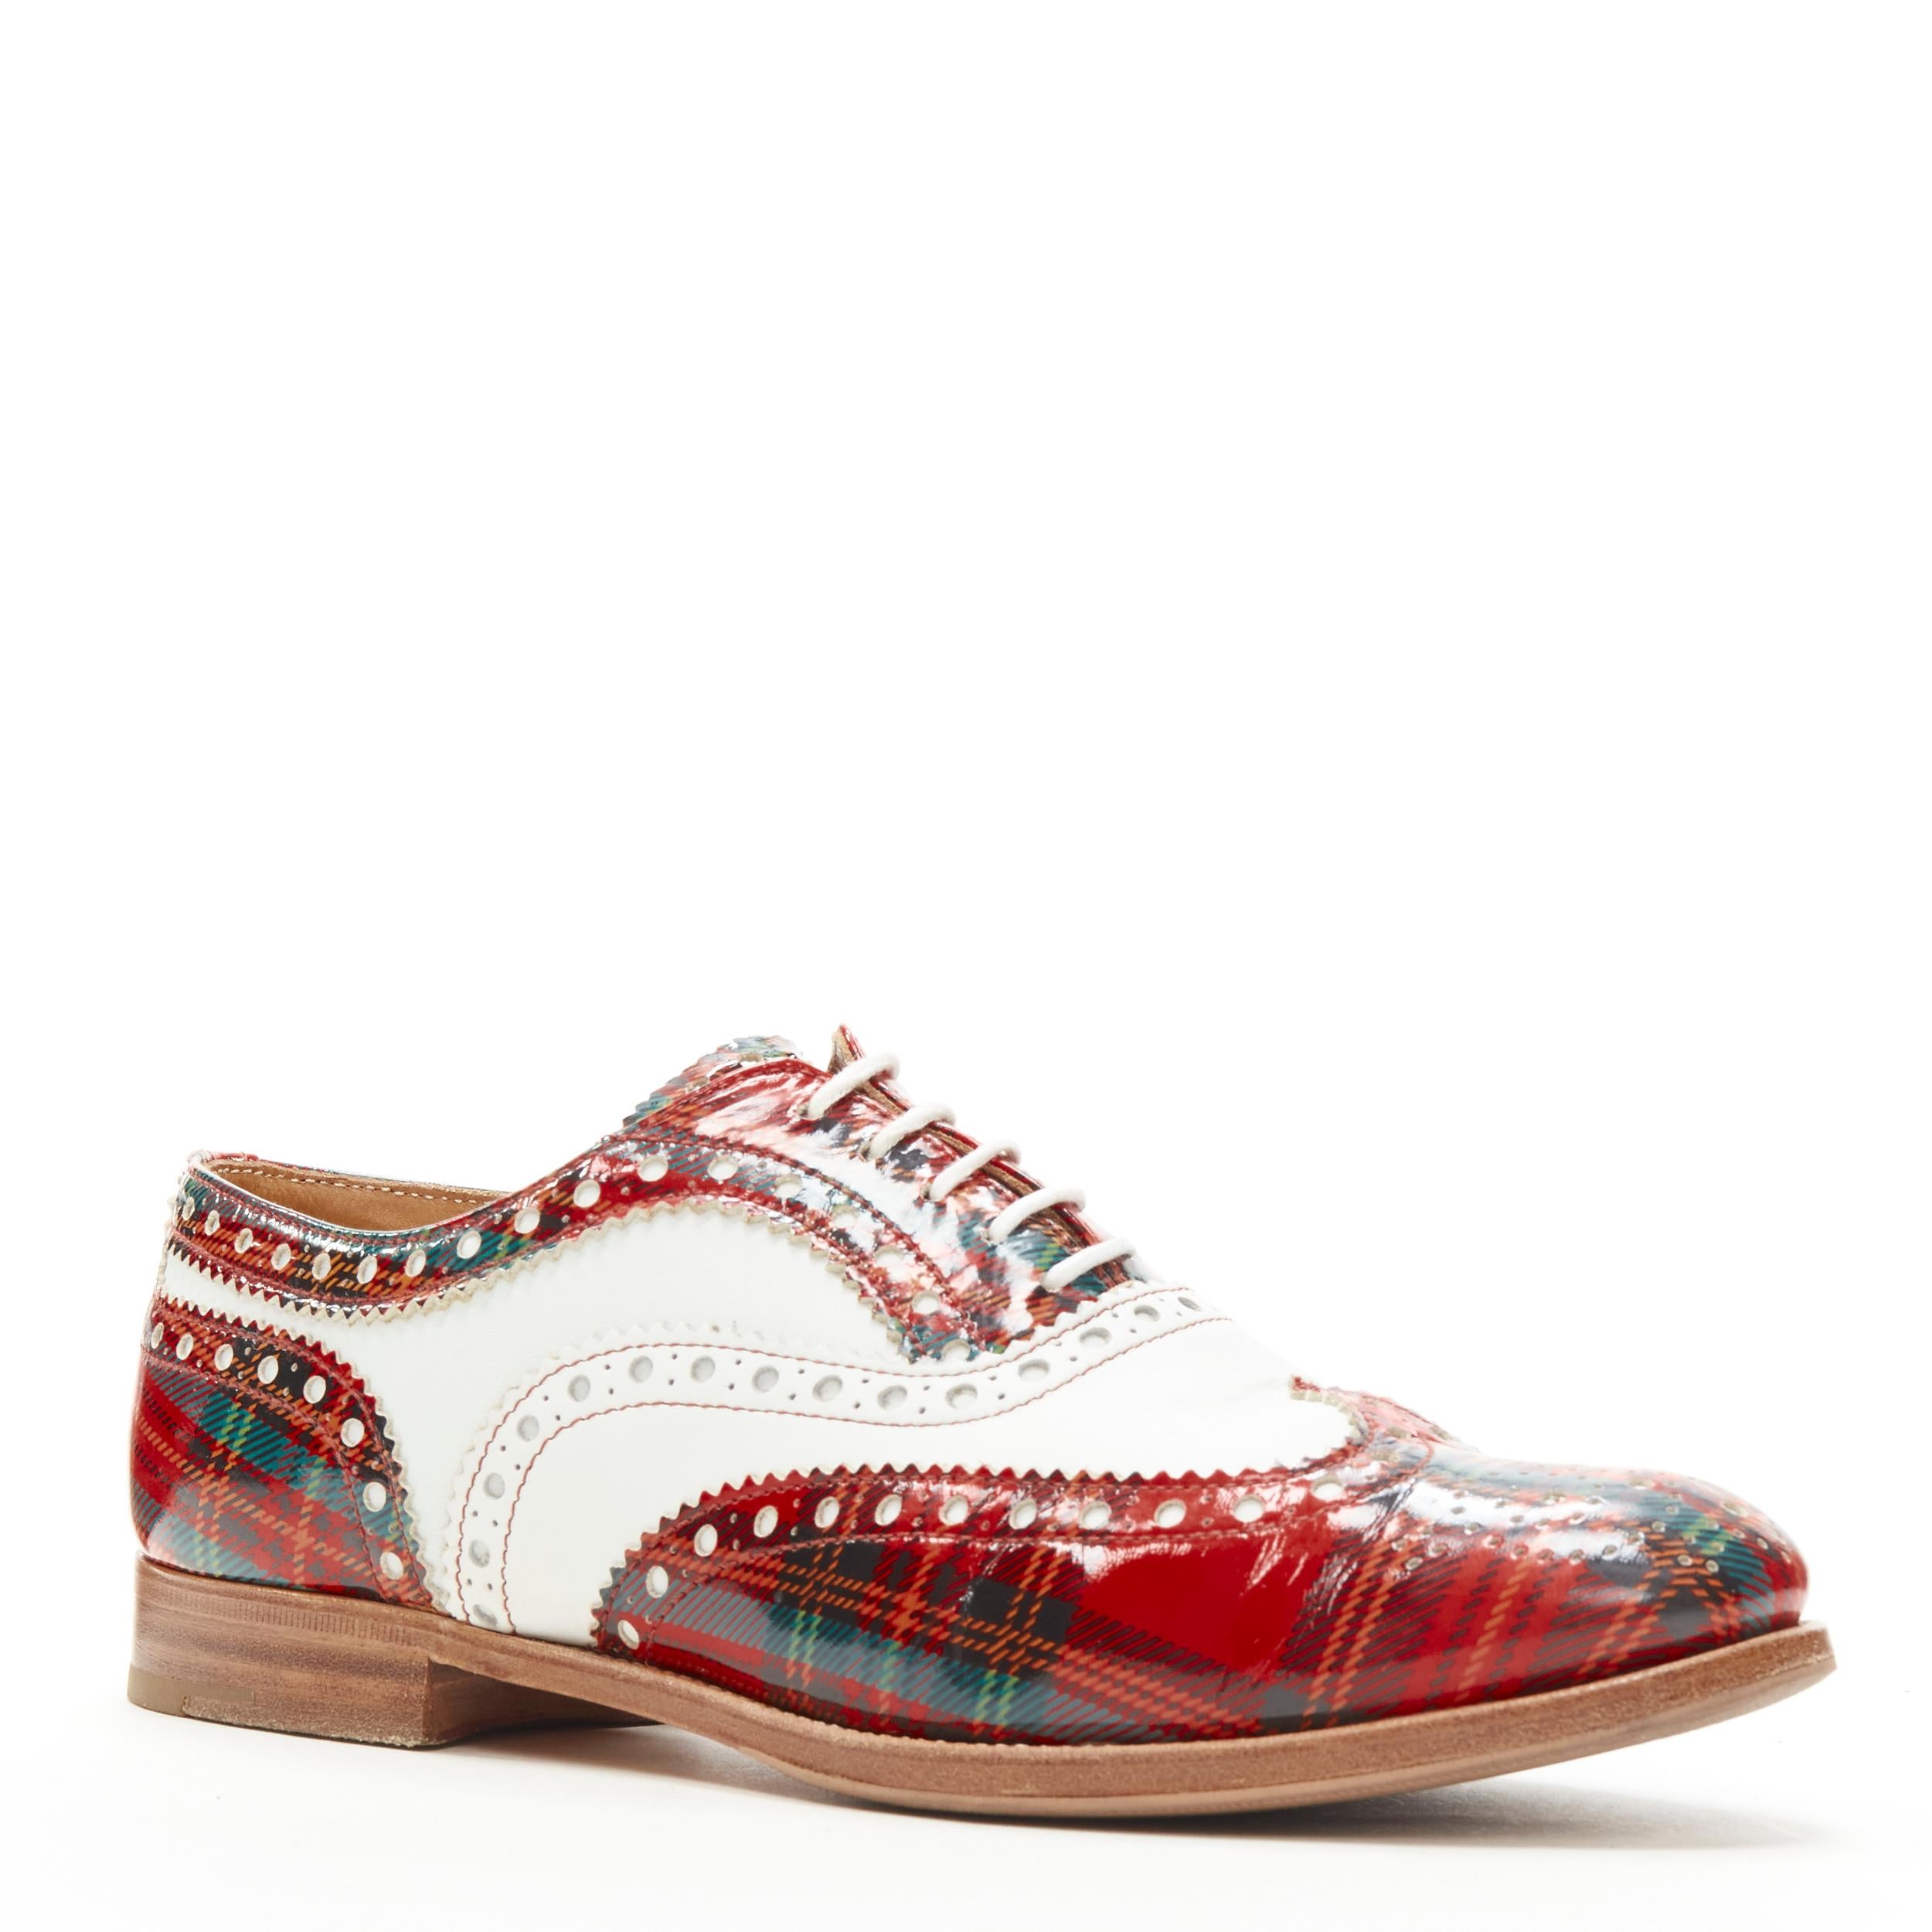 CHURCH'S Burwood red tartan patent white perforated leather brogue EU36.5 
Reference: ANWU/A00384 
Brand: Church's 
Model: Burwood 
Material: Leather 
Color: Red 
Pattern: Plaid 
Closure: Lace 
Extra Detail: Stacked wooden sole. 
Made in: Italy